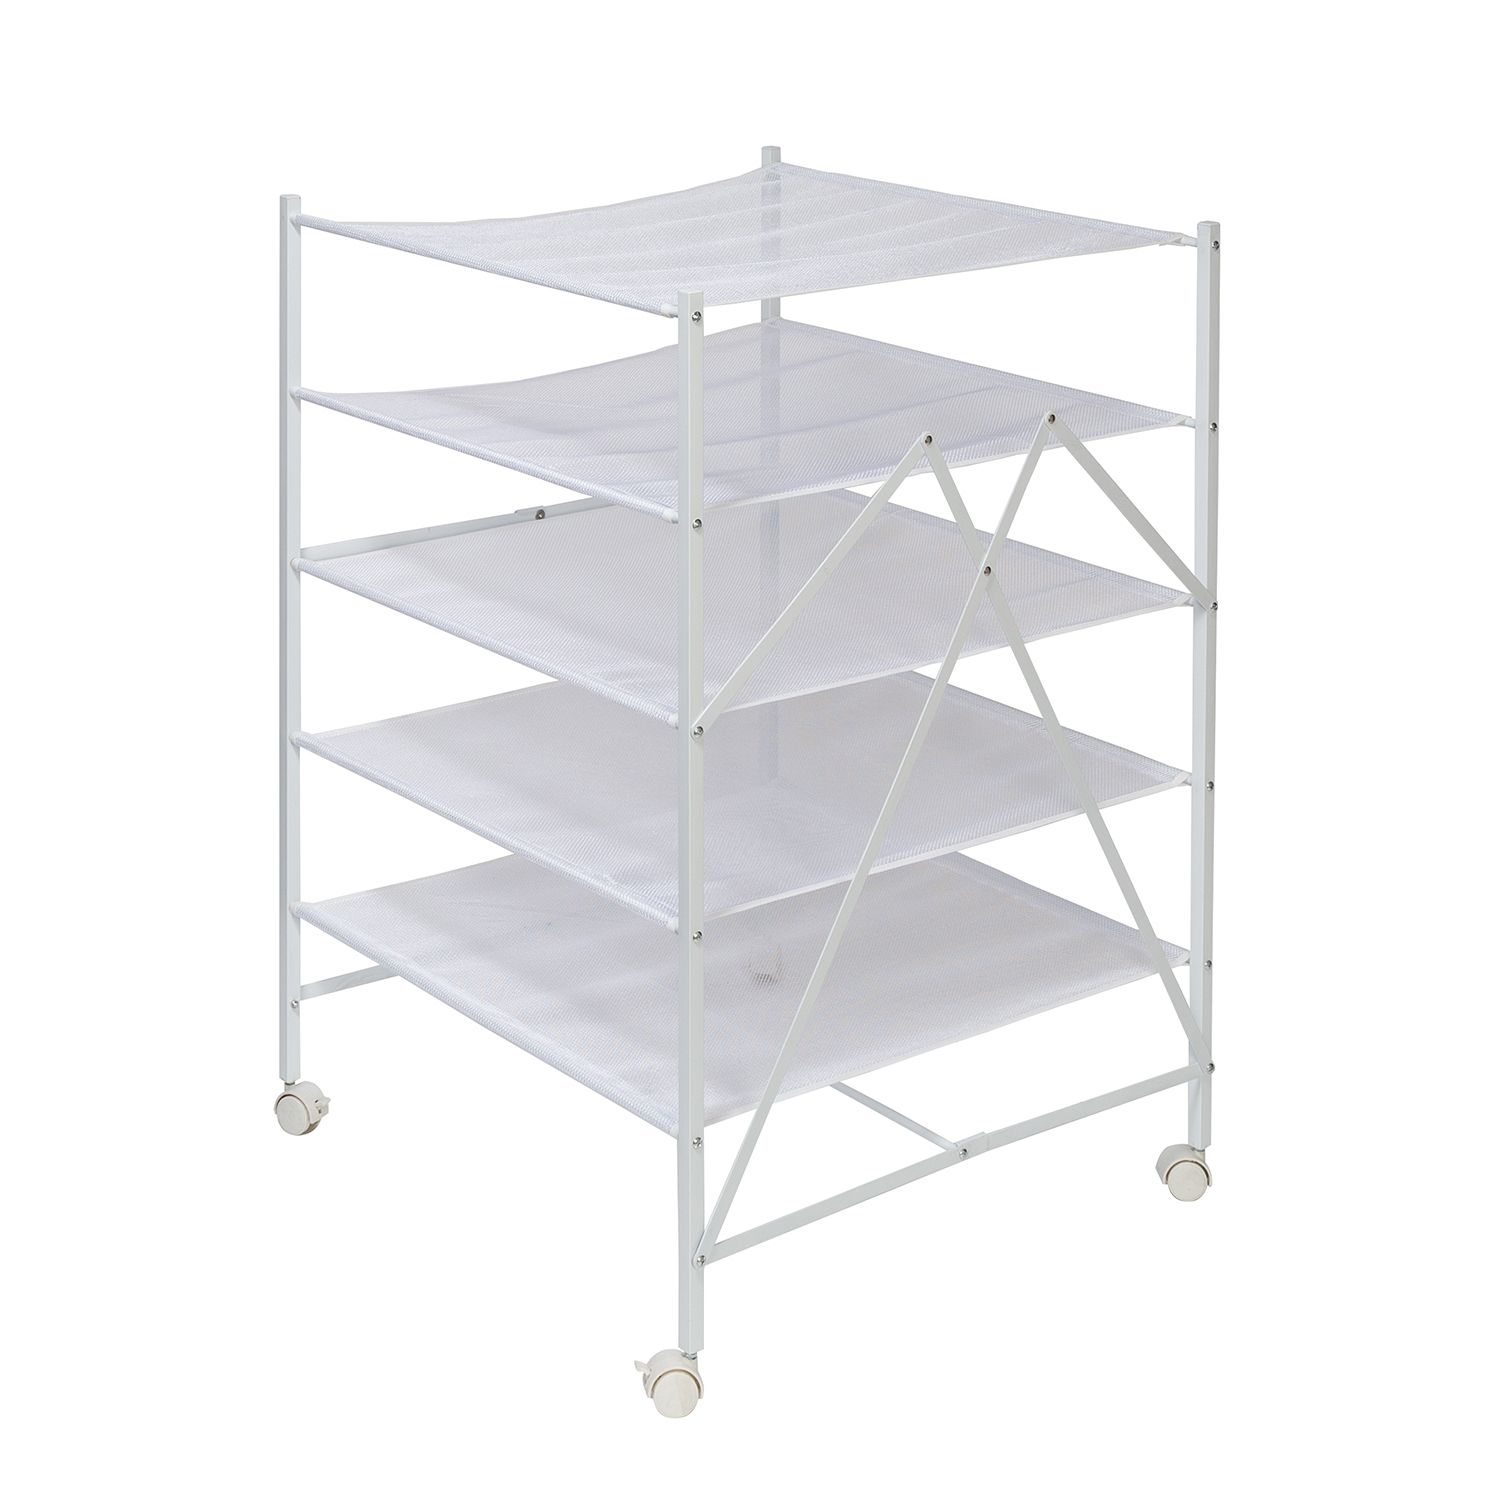 Image for Honey-Can-Do 5-Tier Collapsible Rolling Clothes Drying Rack at Kohl's.